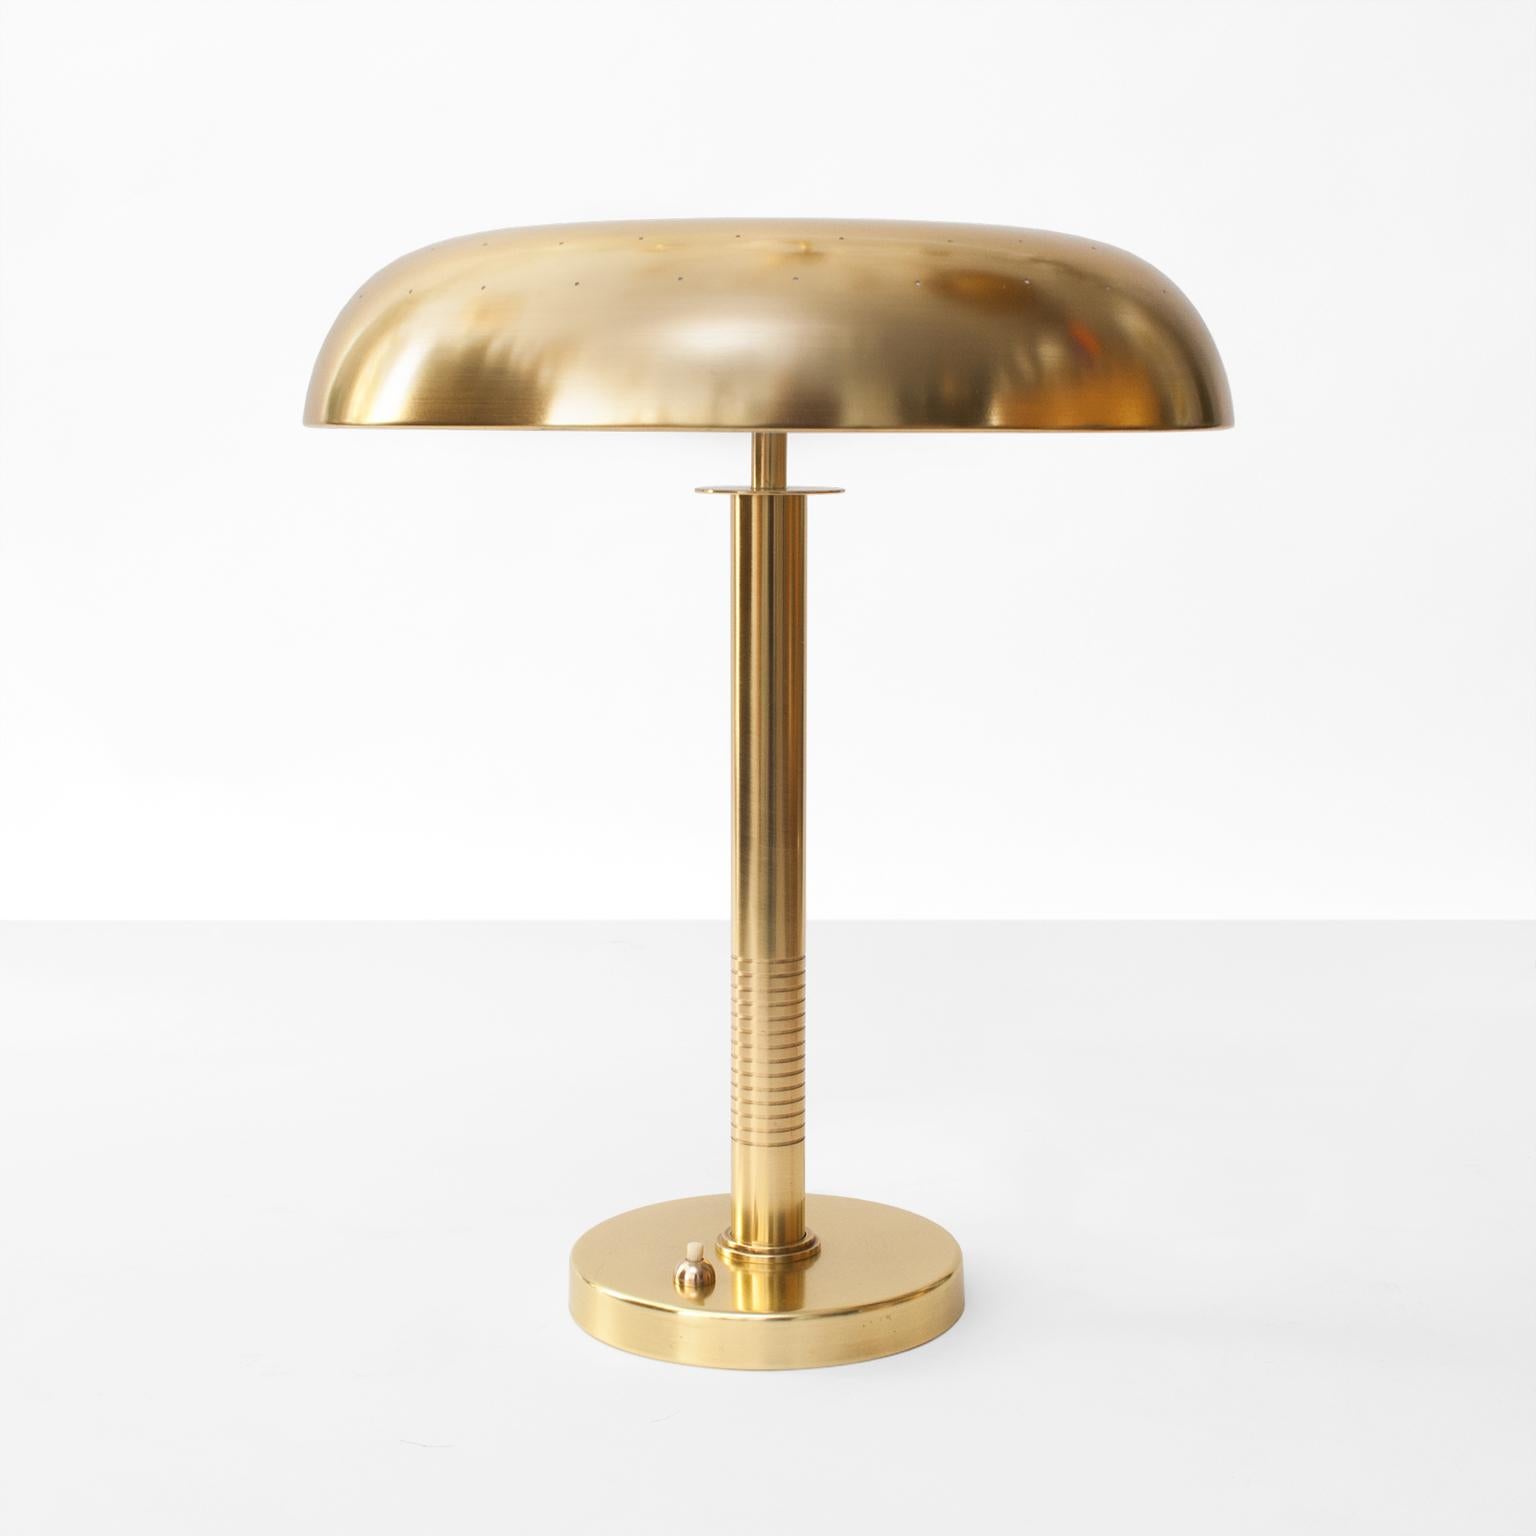 Scandinavian modern table / desk lamp by Bertil Brisborg for Bohlmarks, Sweden, circa 1950. Newly restored polished an lacquered brass, newly wired with 2 standard base sockets for use in the USA. Impressed manufacturer's mark to underside. Shade